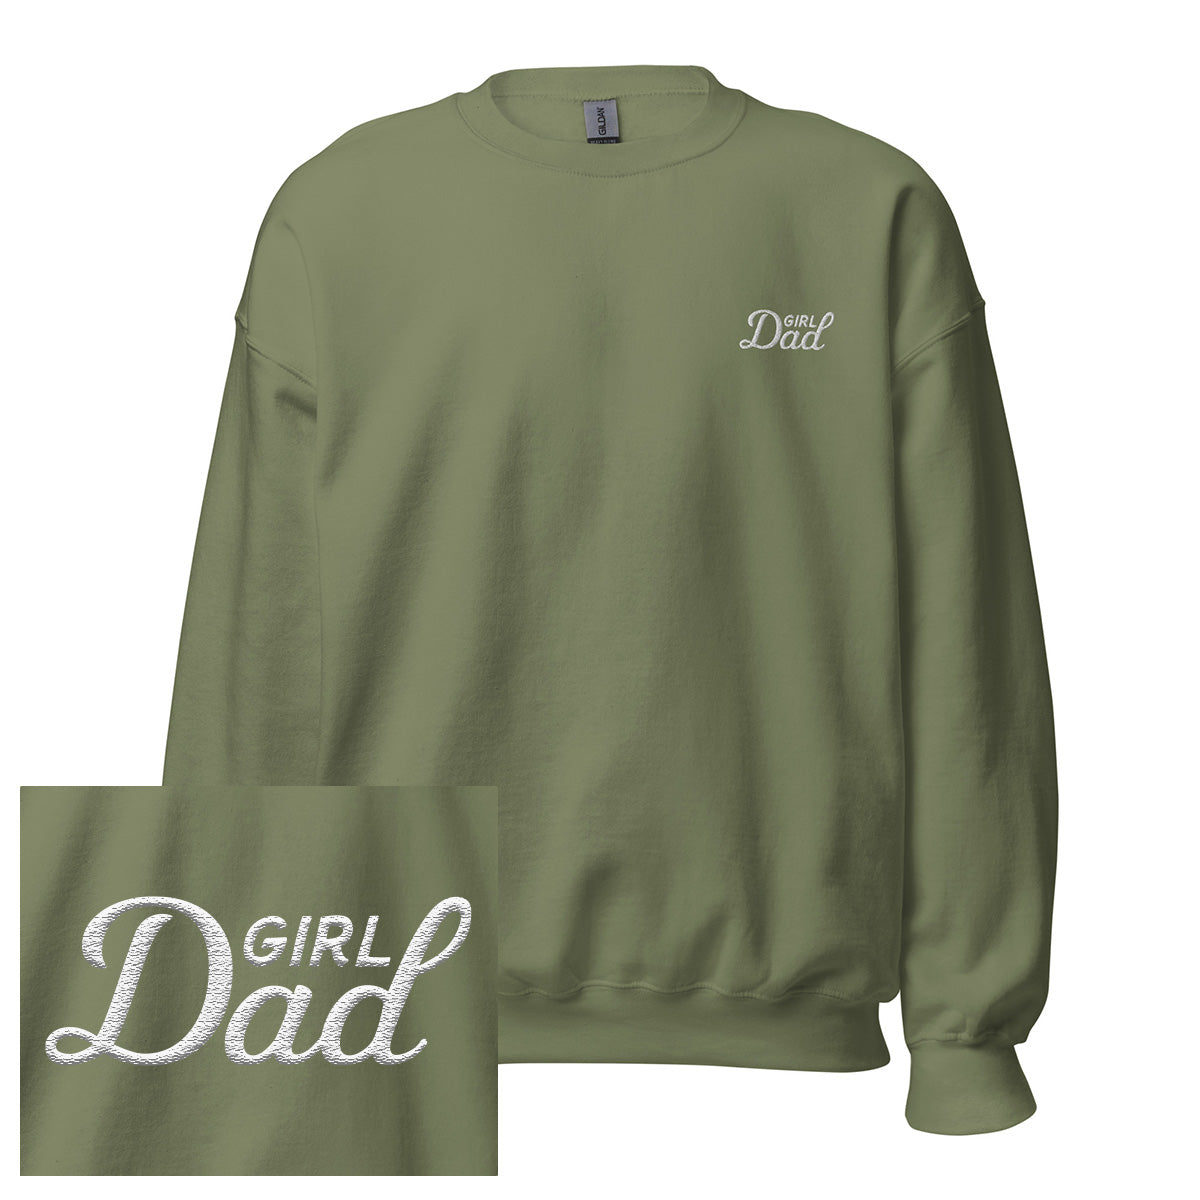 Girl Dad Embroidered Crewneck-Crewnecks-Bussin With The Boys-Olive-S-Barstool Sports